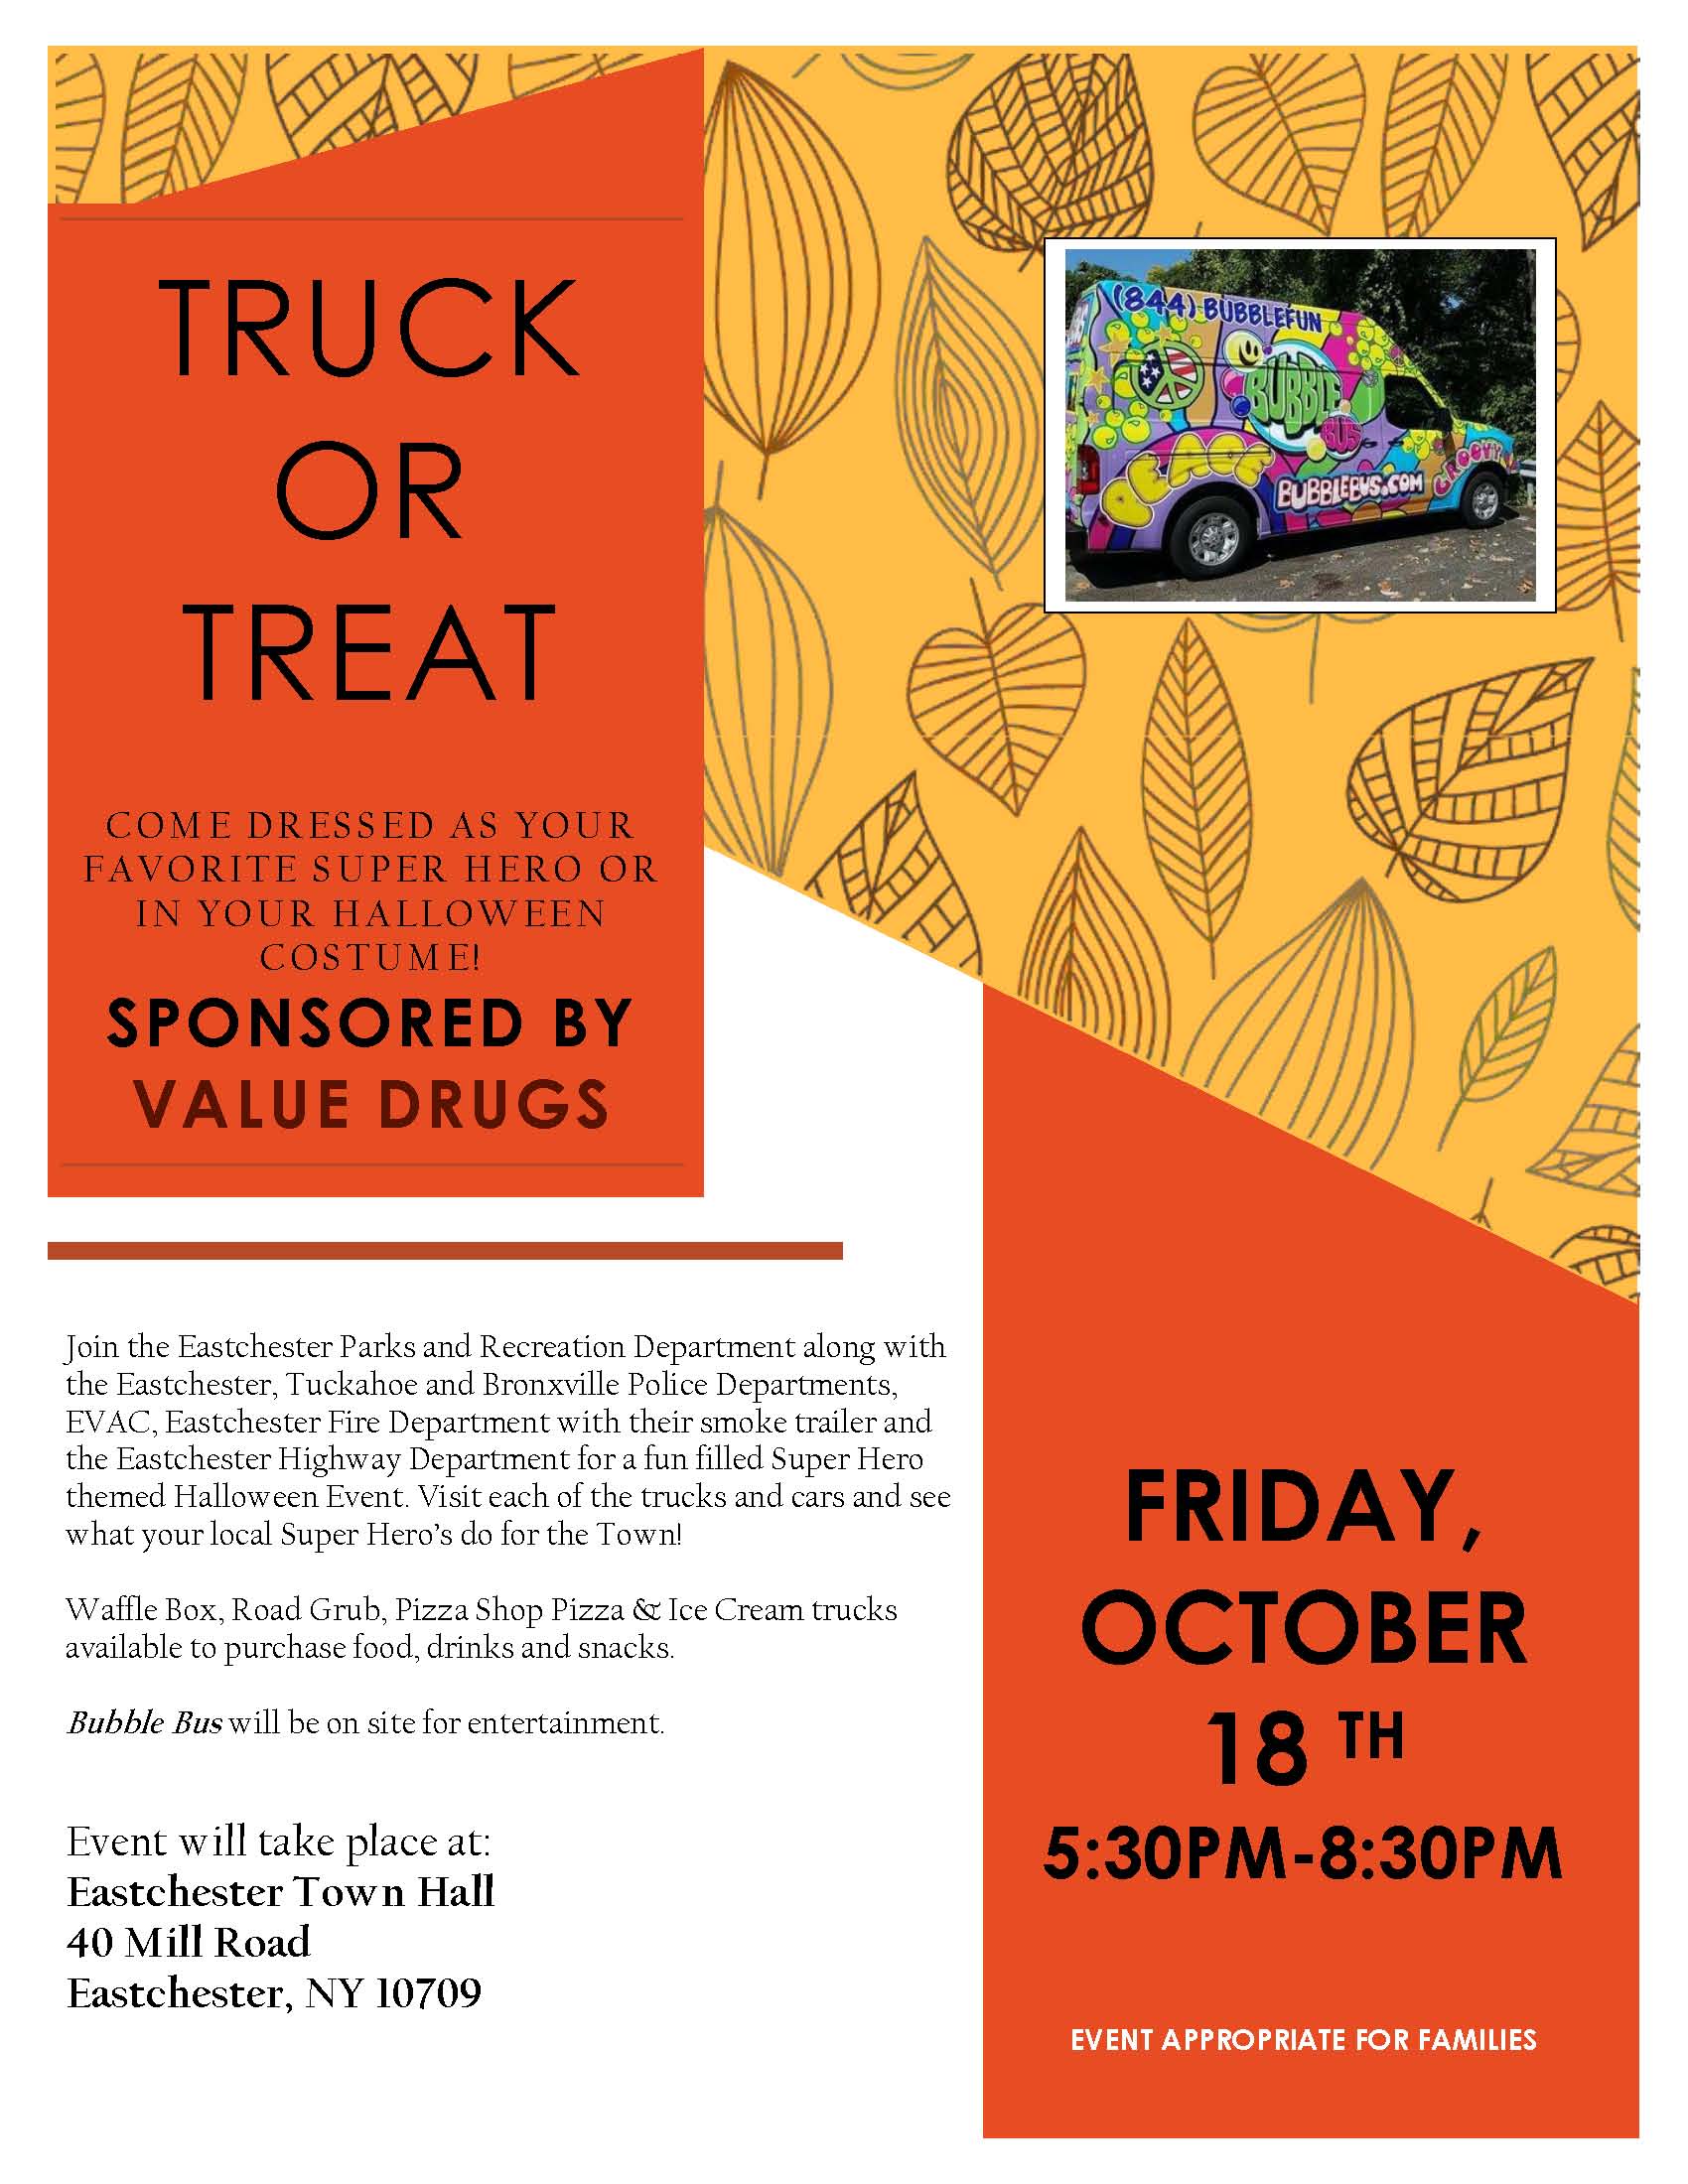 Truck or treat 2019.2